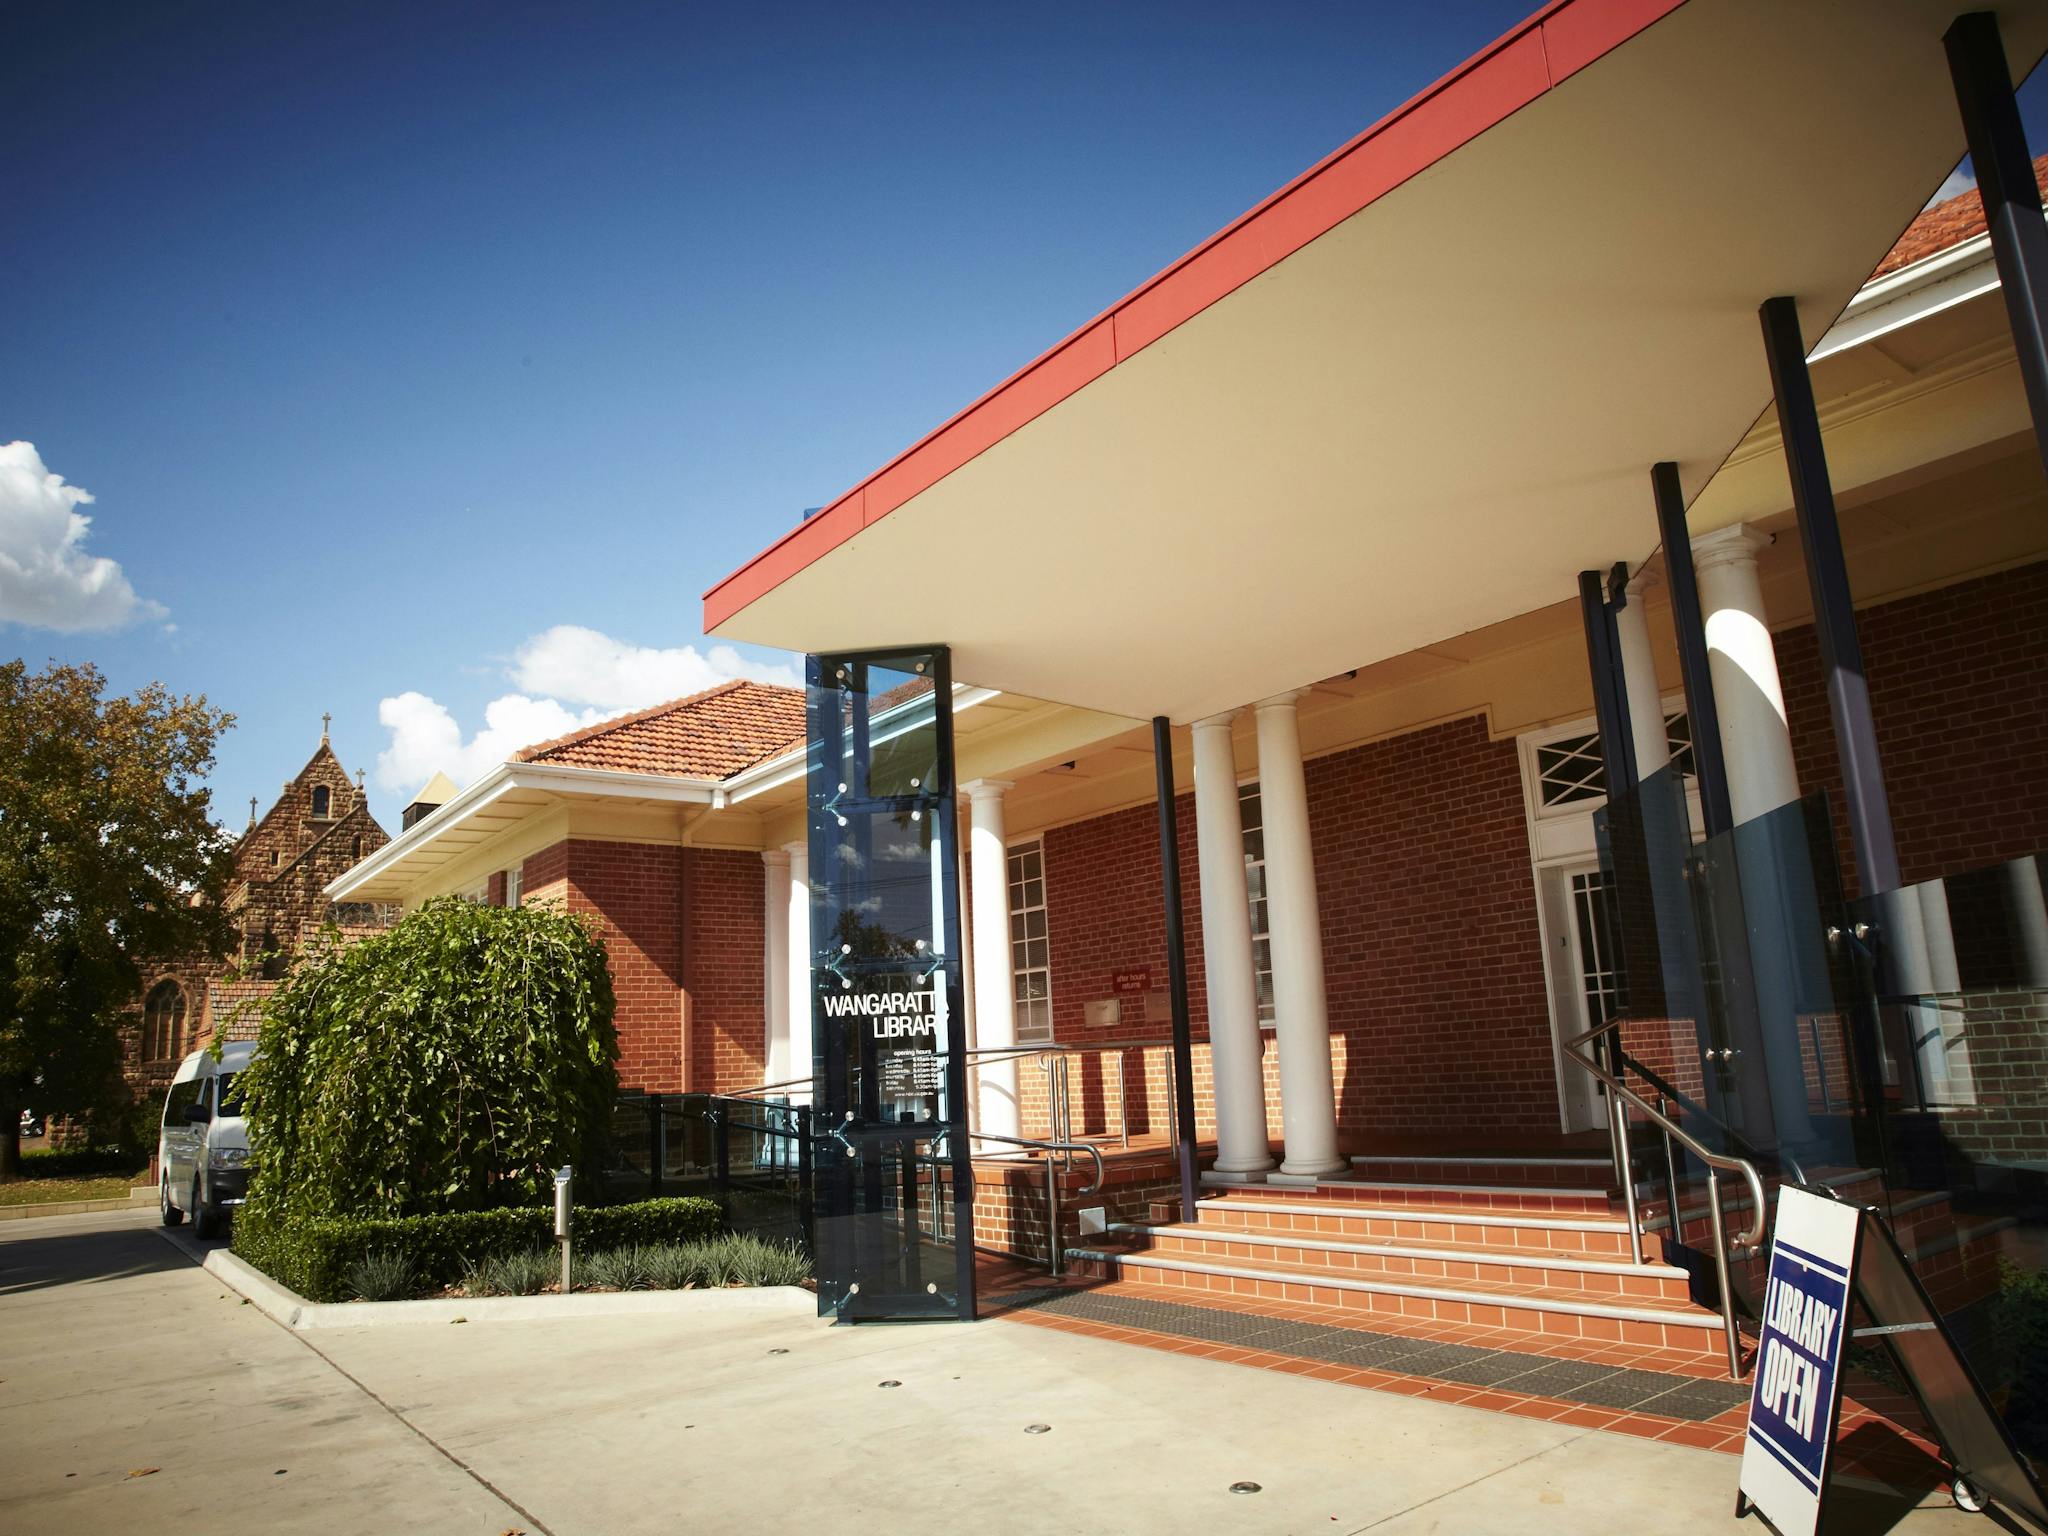 Front entrance of the Wangaratta Library.